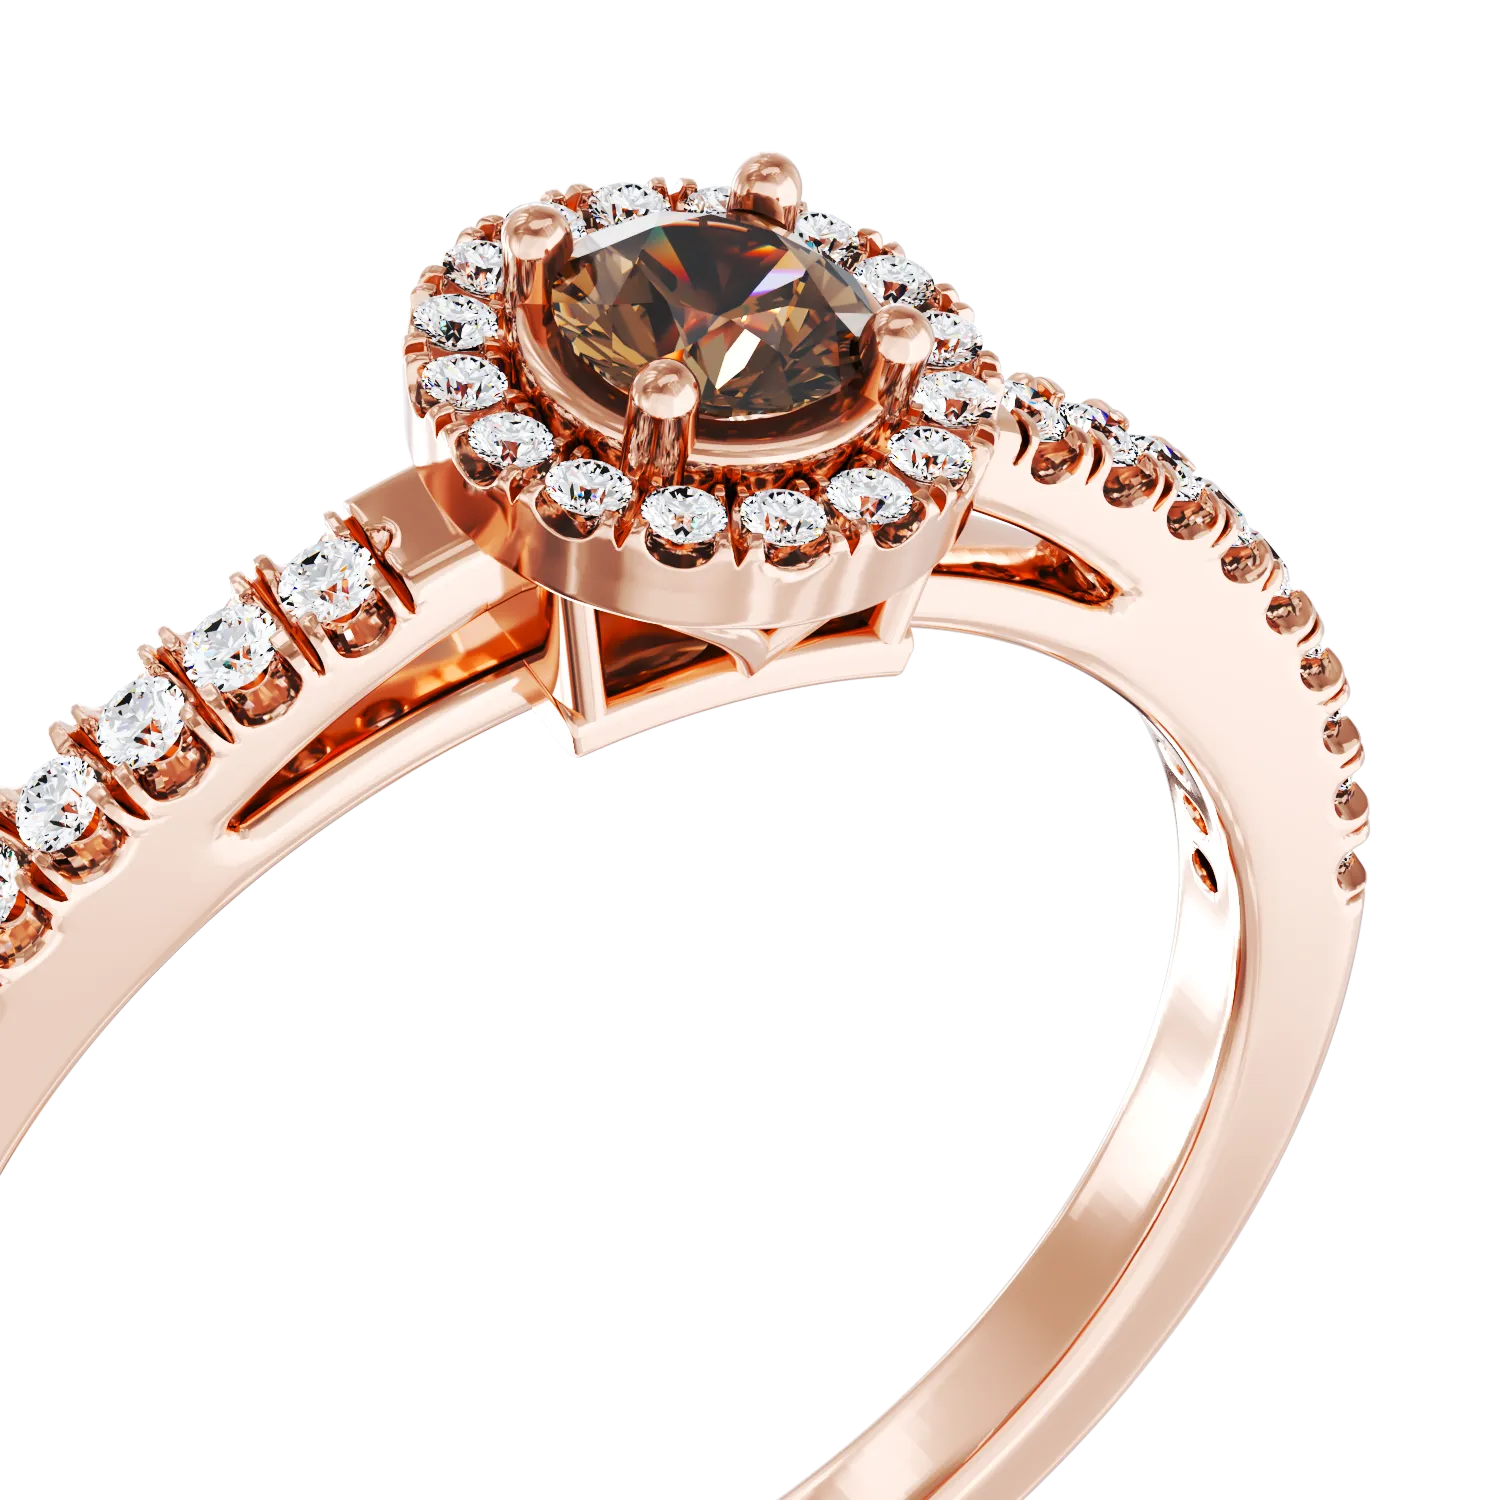 18K rose gold engagement ring with brown diamond of 0.19ct and diamonds of 0.18ct